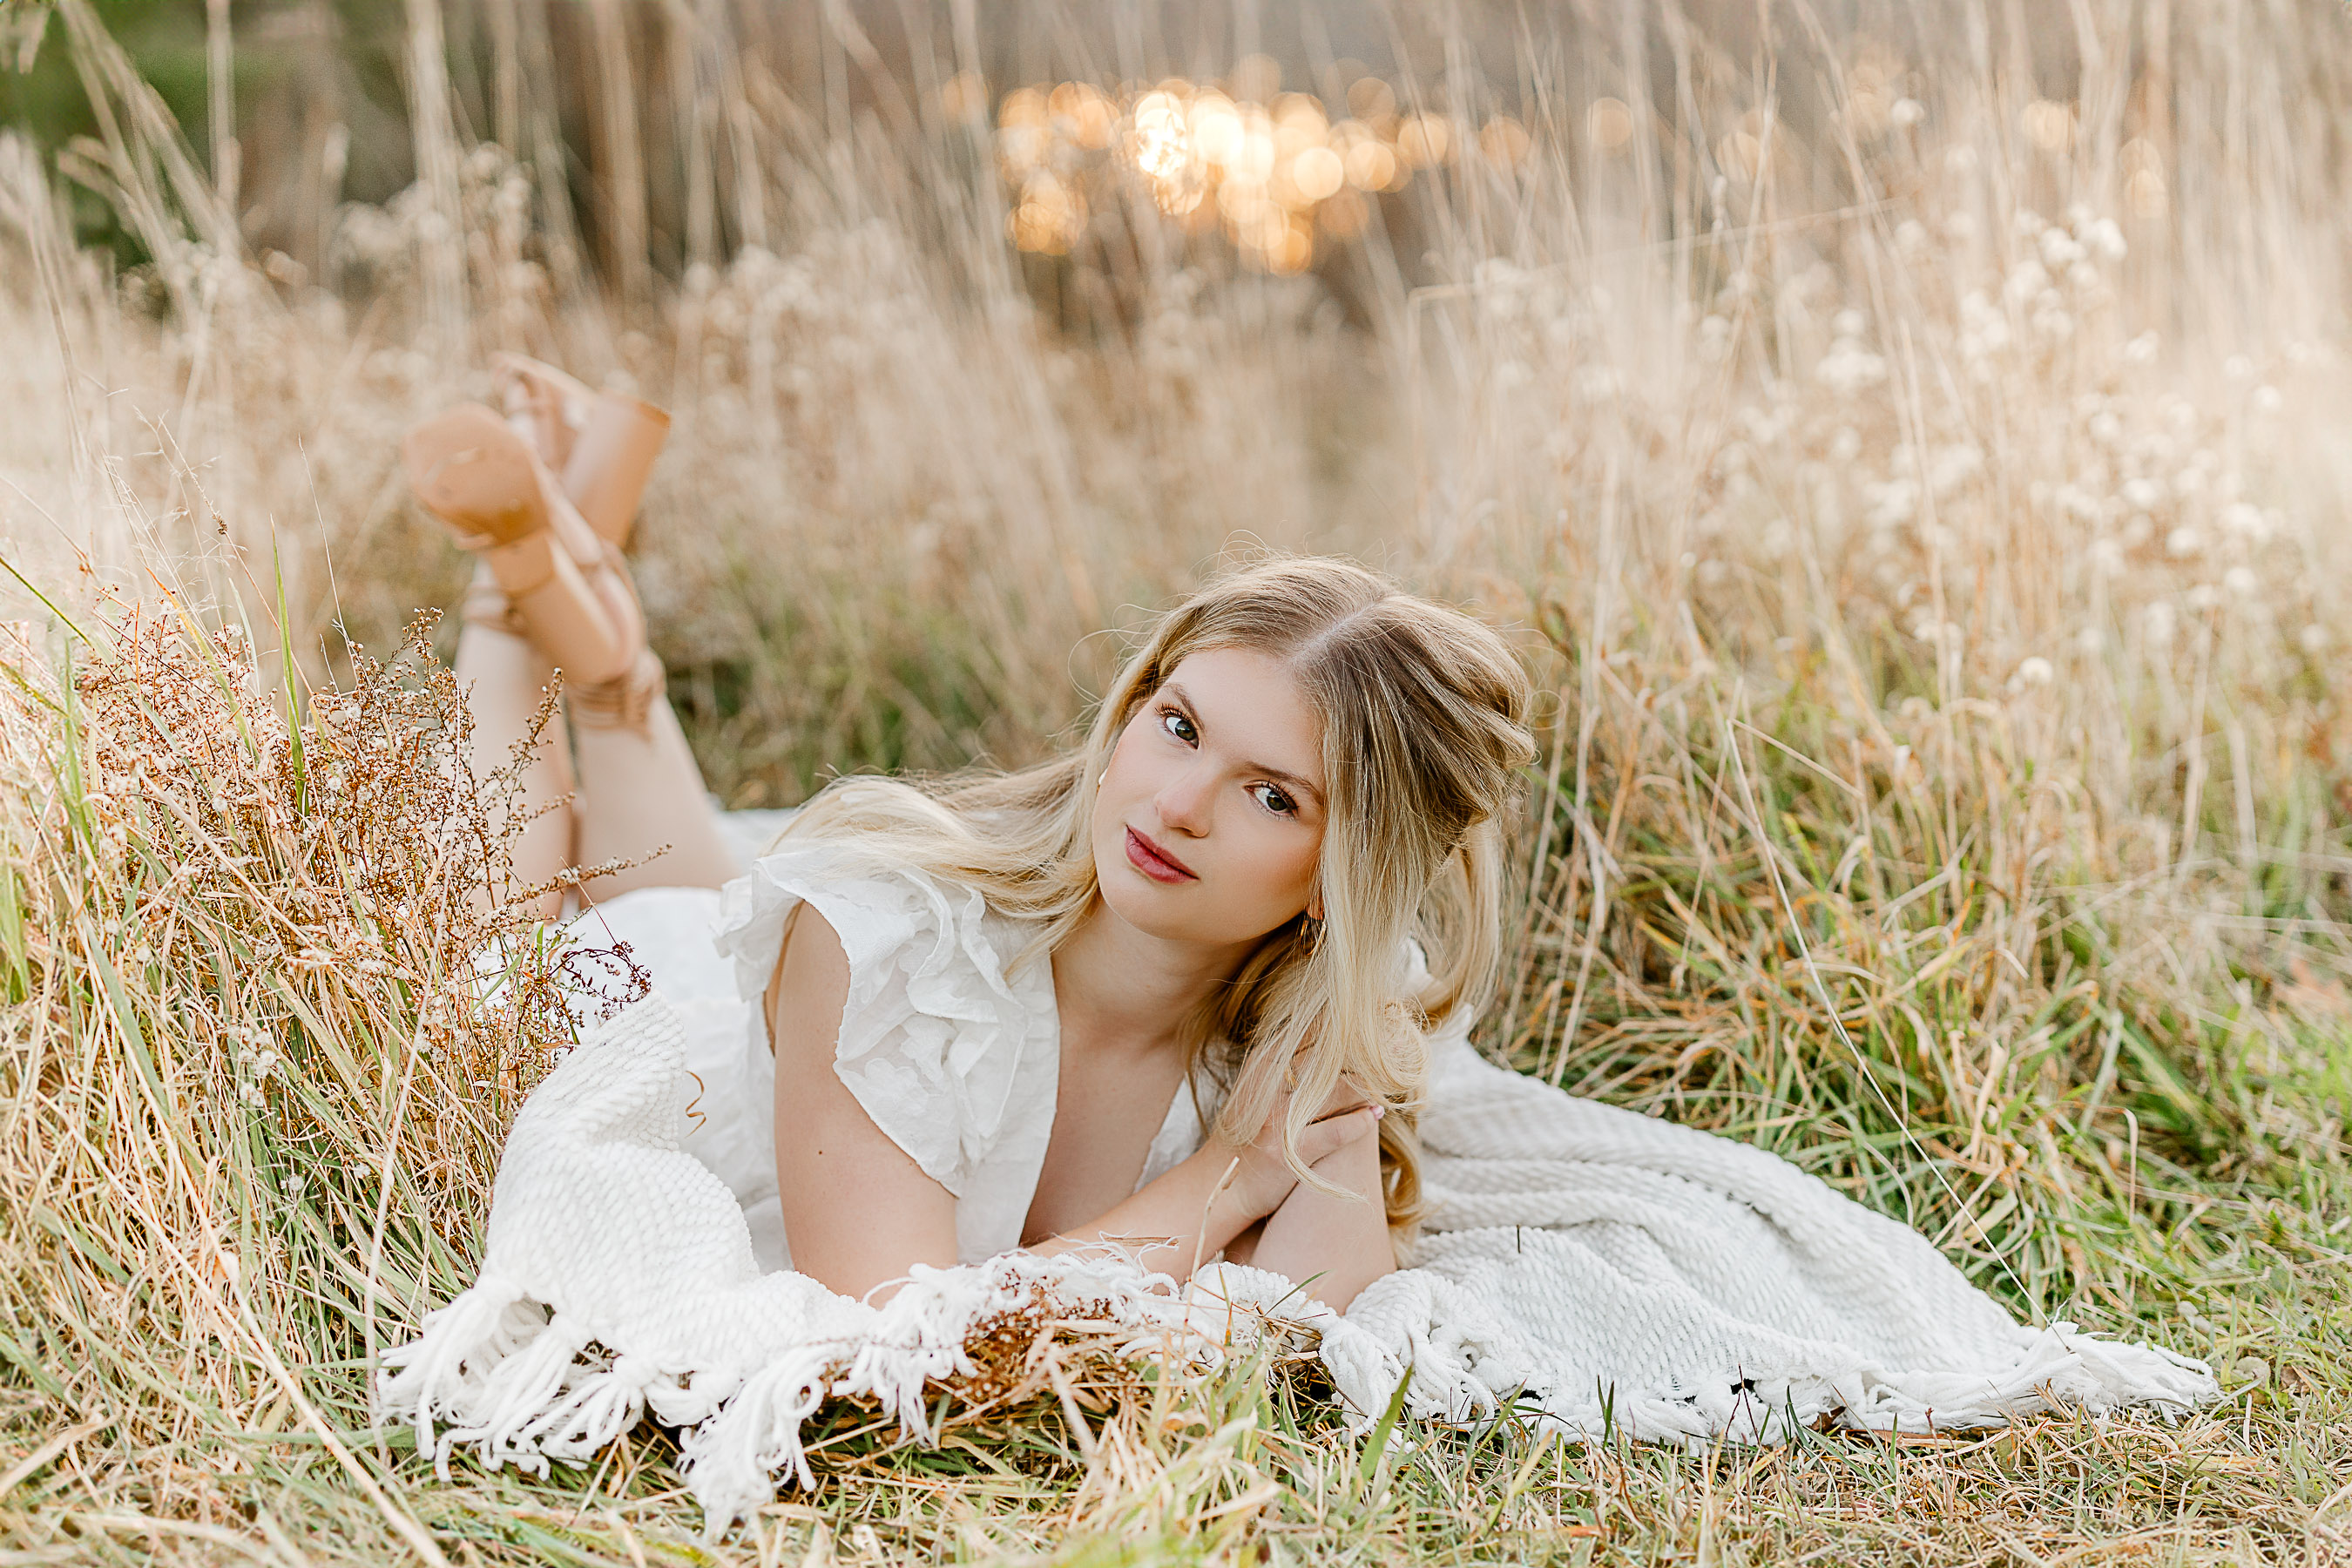 This image demonstrates that when choosing outfits for your senior photos it is best to select neutral colors, such as Lauren's cream colored dress while laying in a field of gold